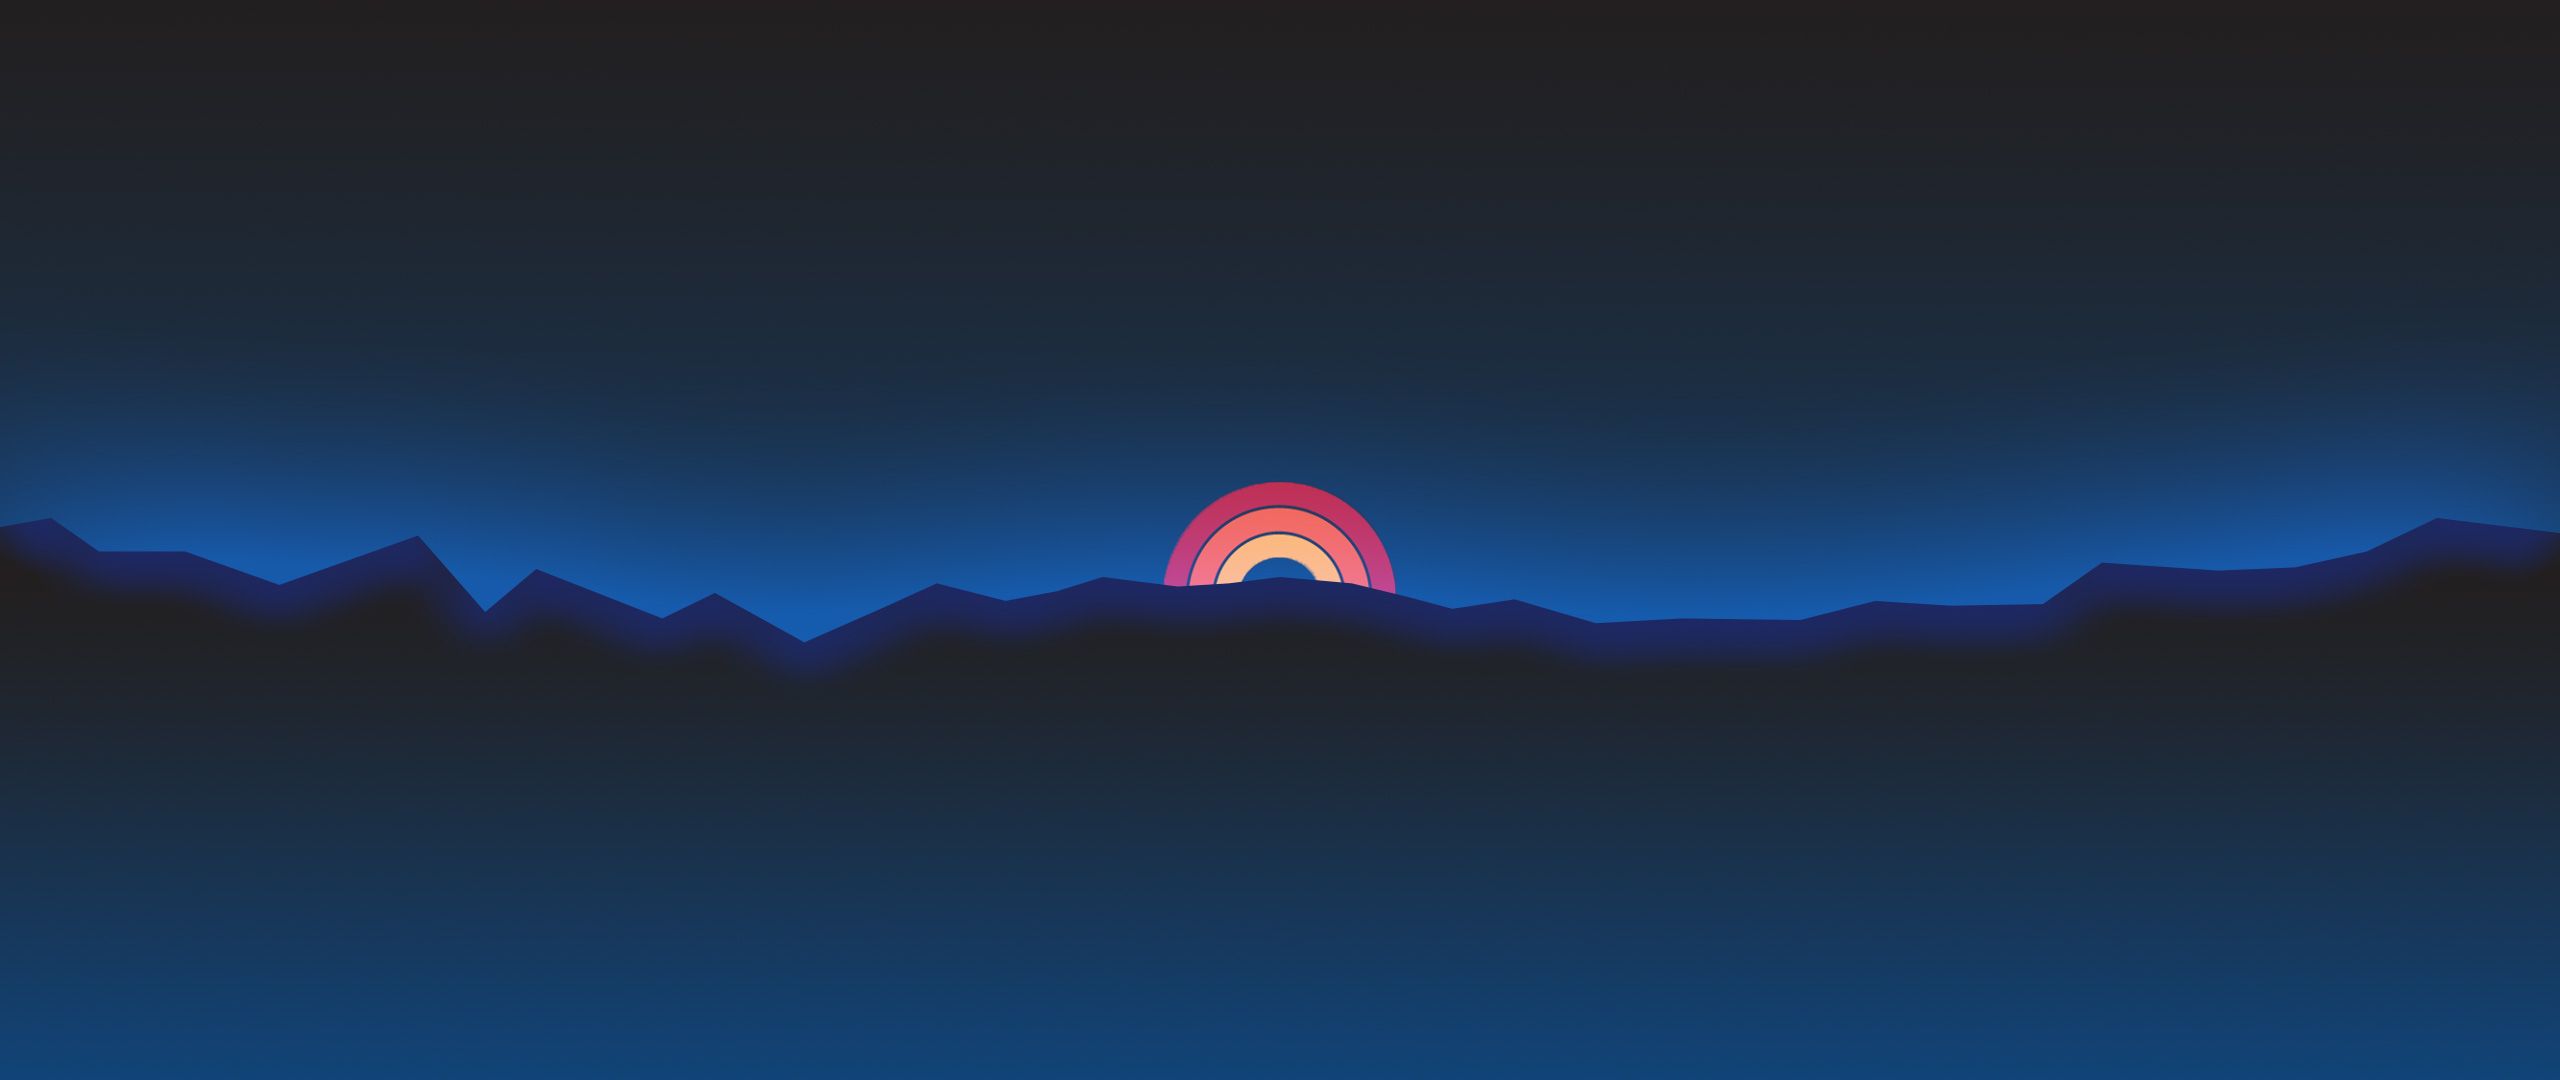 Minimalism Neon Rainbow Sunset Retro Style, HD Artist, 4k Wallpaper, Image, Background, Photo and Picture